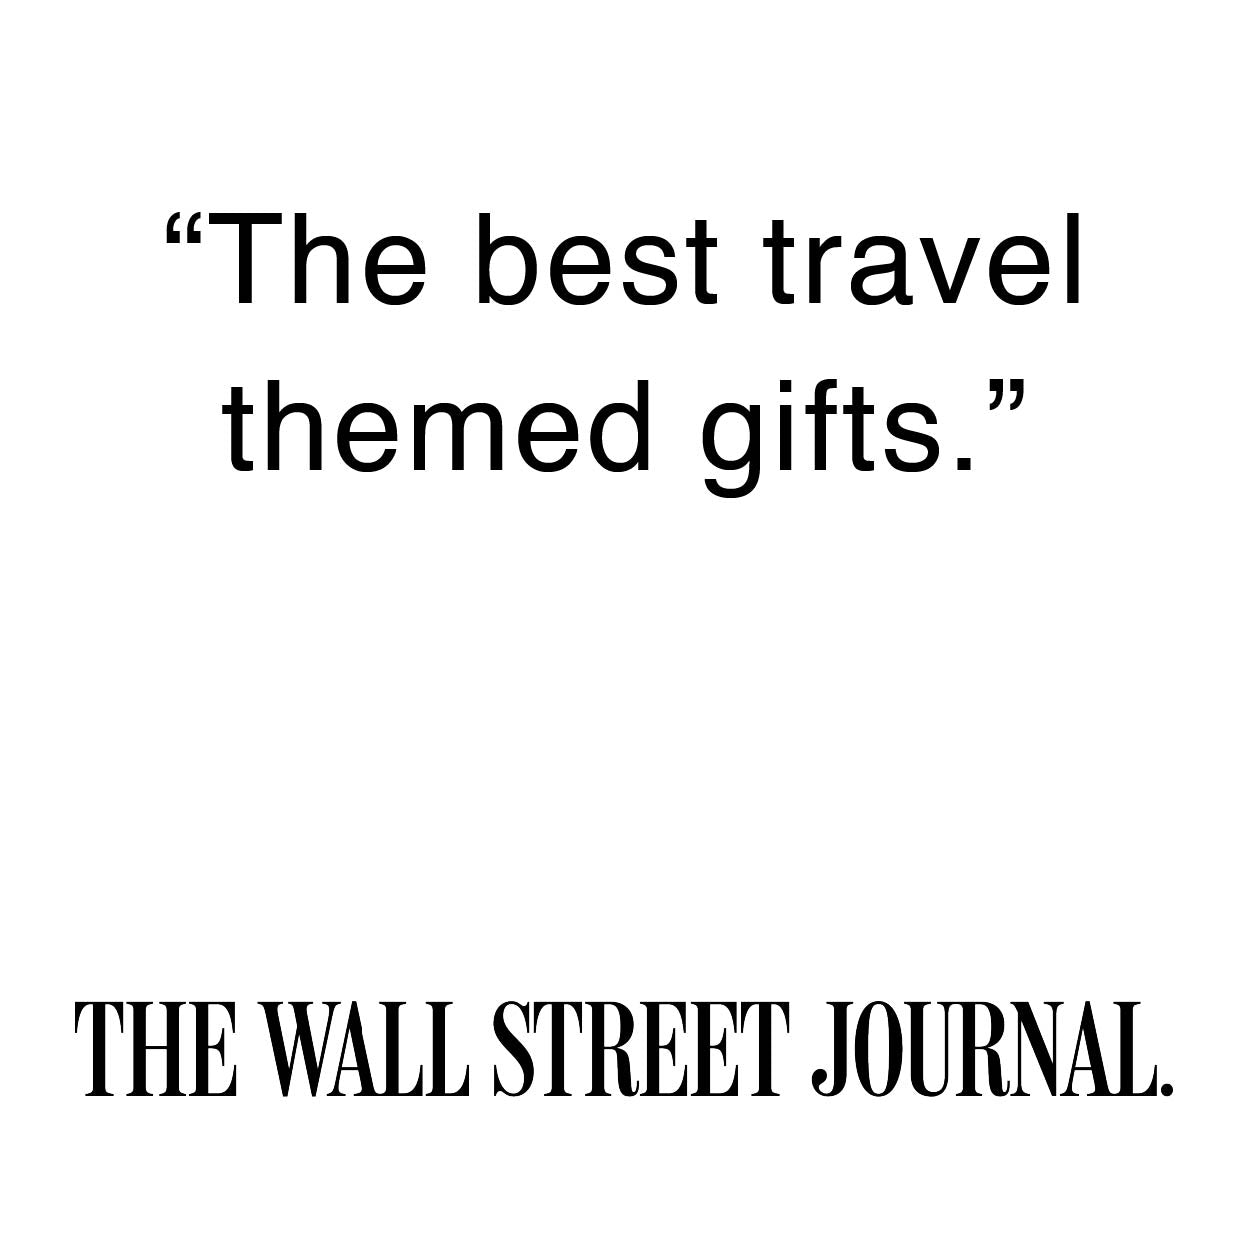 wall street journal press quote: the best travel themed gifts.